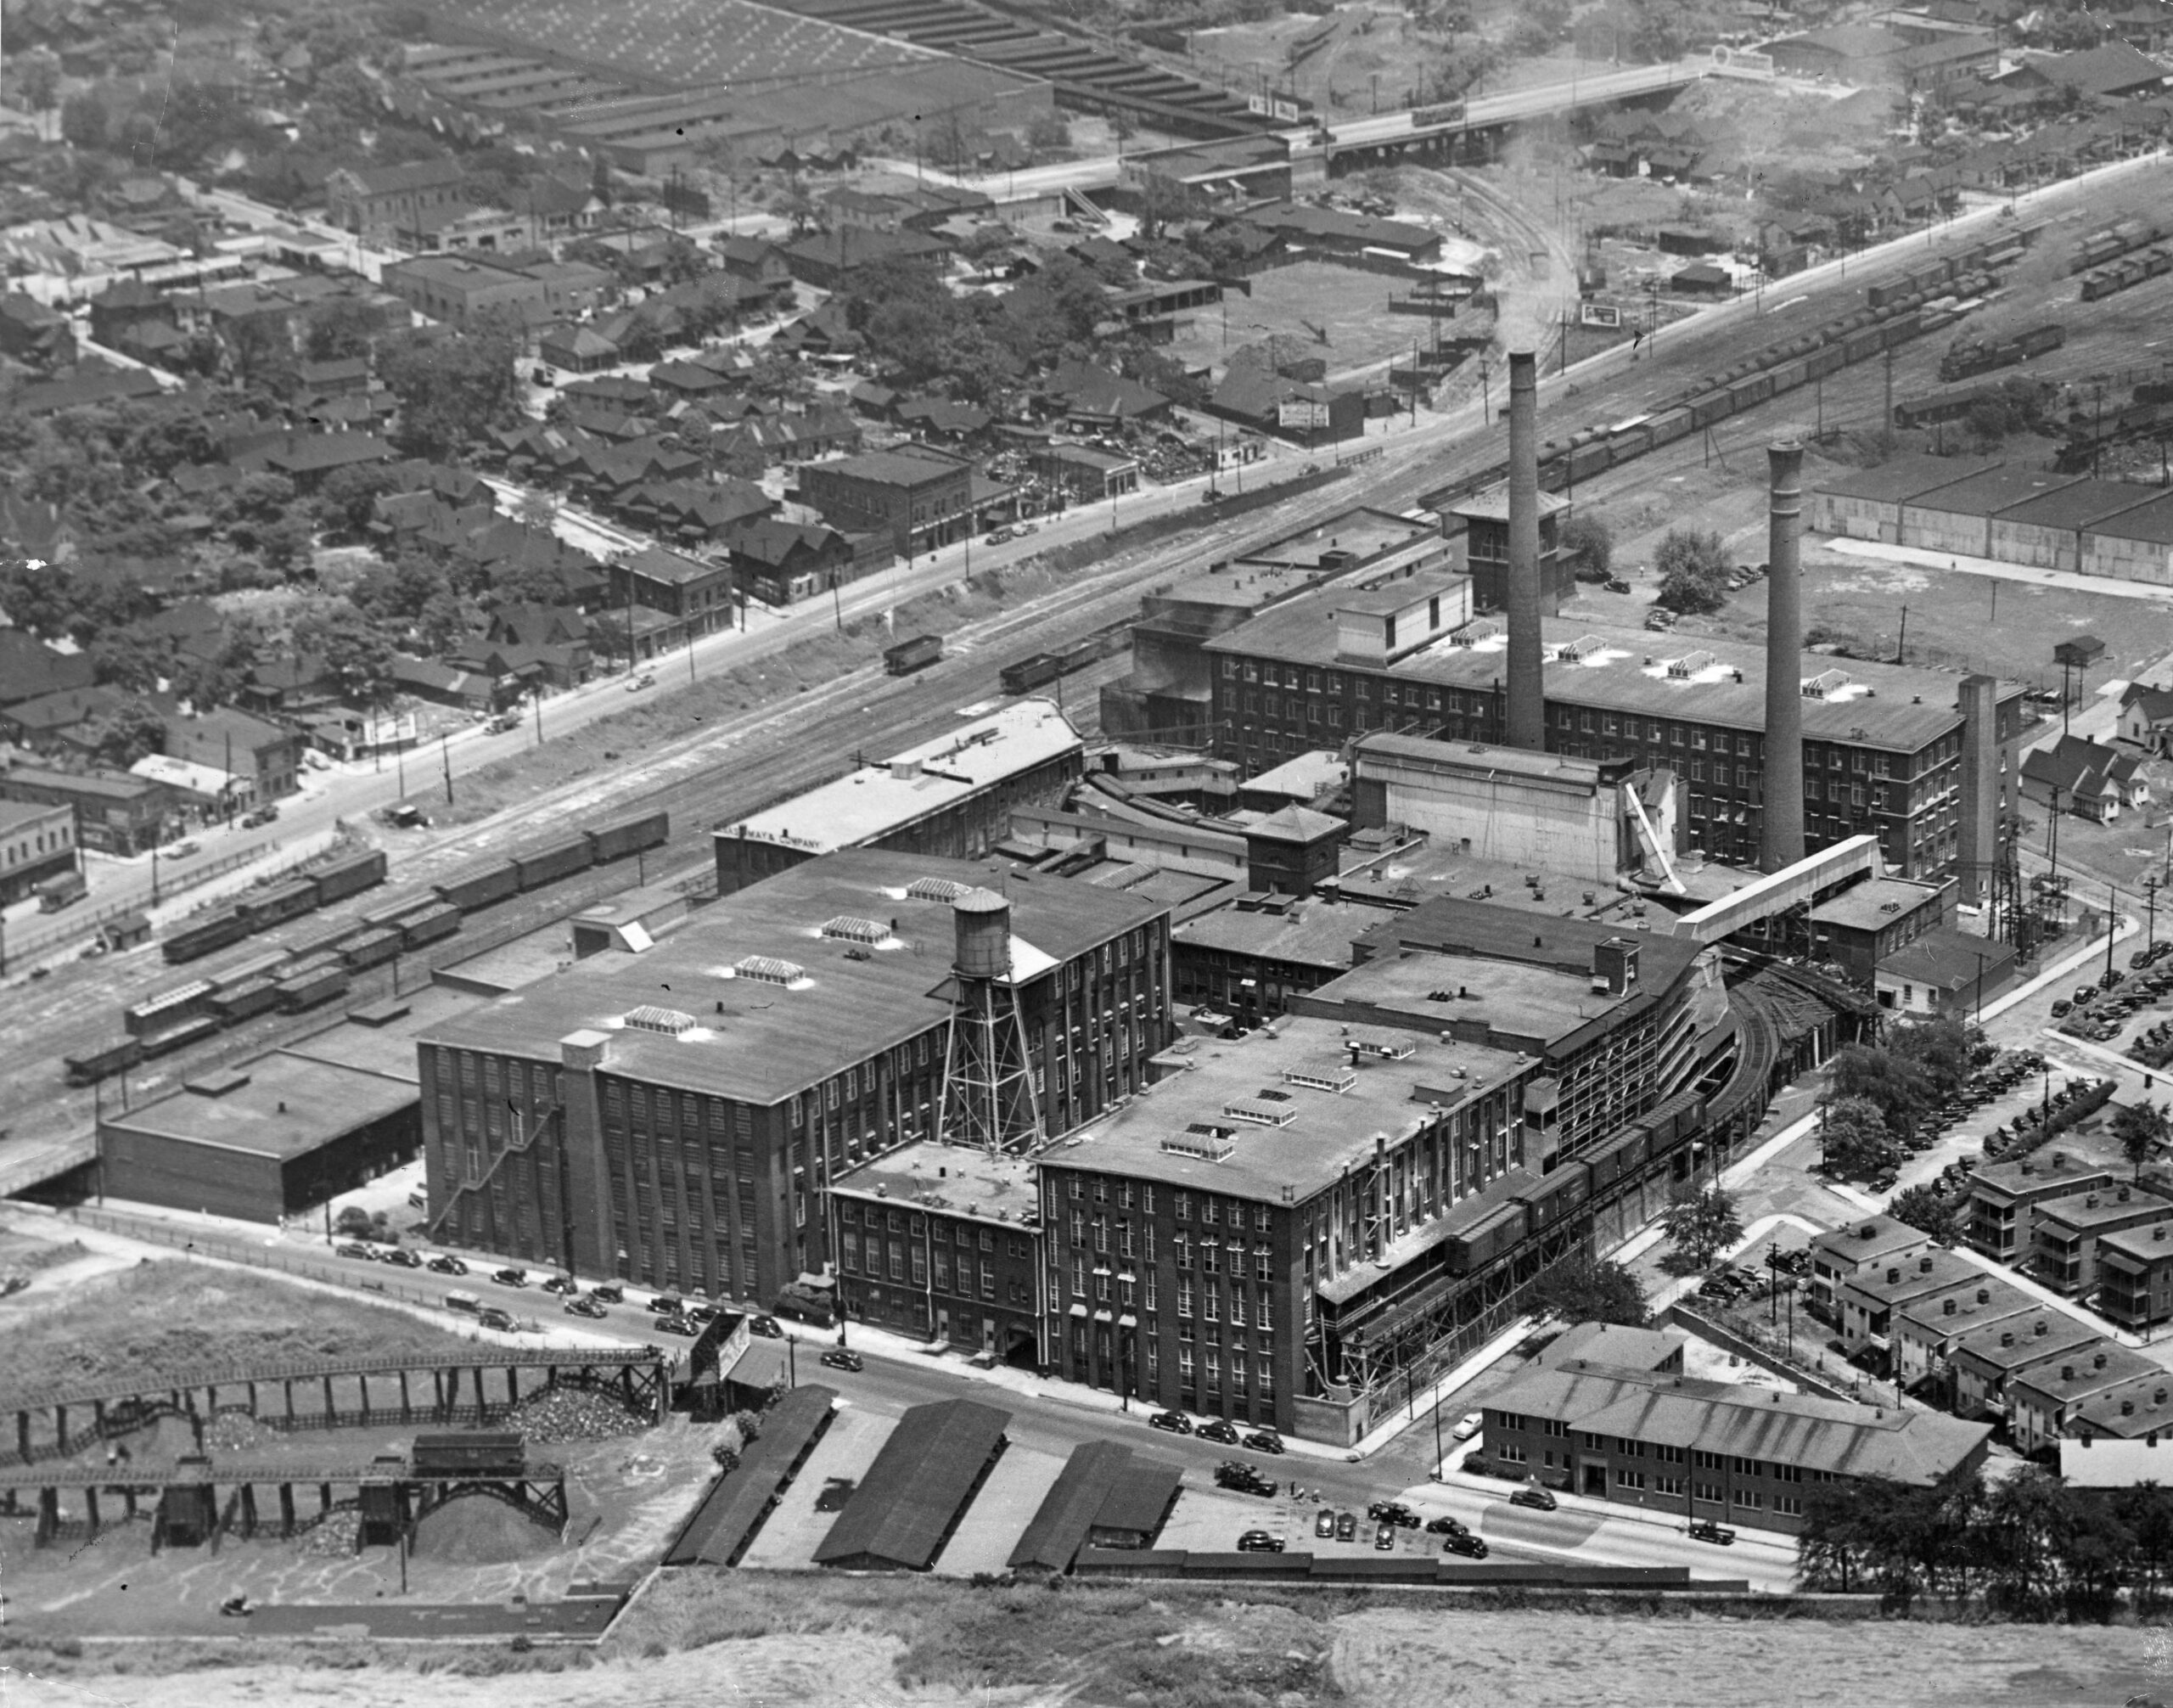 Aerial view of the Fulton Bag and Cotton Mill in the Cabbagetown area of Atlanta